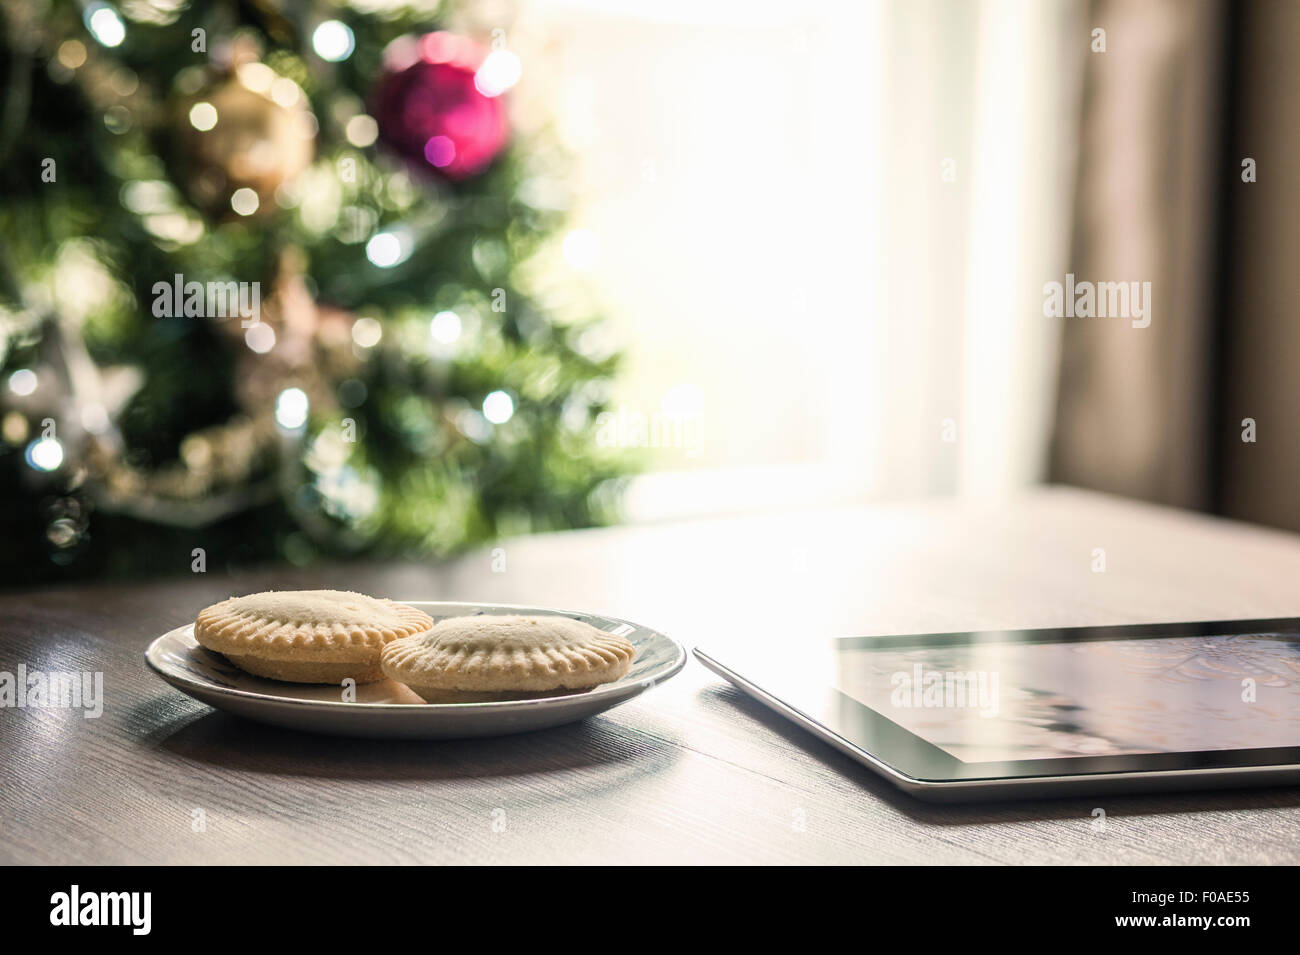 Mince pies and digital tablet on table Stock Photo